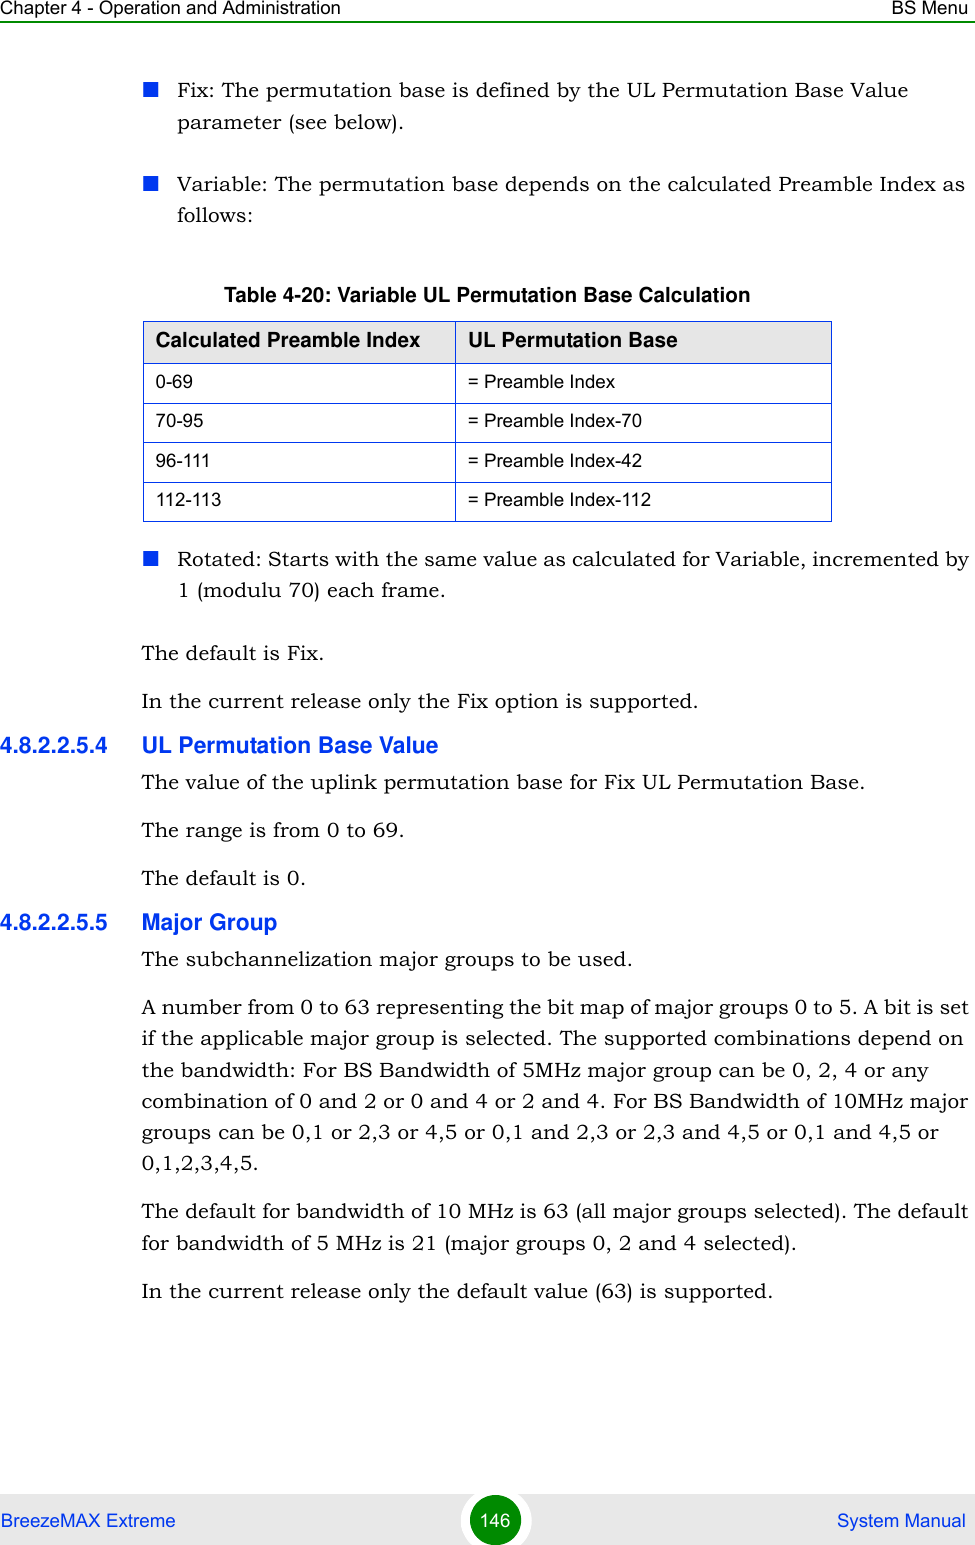 Chapter 4 - Operation and Administration BS MenuBreezeMAX Extreme 146  System ManualFix: The permutation base is defined by the UL Permutation Base Value parameter (see below).Variable: The permutation base depends on the calculated Preamble Index as follows:Rotated: Starts with the same value as calculated for Variable, incremented by 1 (modulu 70) each frame.The default is Fix.In the current release only the Fix option is supported.4.8.2.2.5.4 UL Permutation Base ValueThe value of the uplink permutation base for Fix UL Permutation Base.The range is from 0 to 69.The default is 0.4.8.2.2.5.5 Major GroupThe subchannelization major groups to be used.A number from 0 to 63 representing the bit map of major groups 0 to 5. A bit is set if the applicable major group is selected. The supported combinations depend on the bandwidth: For BS Bandwidth of 5MHz major group can be 0, 2, 4 or any combination of 0 and 2 or 0 and 4 or 2 and 4. For BS Bandwidth of 10MHz major groups can be 0,1 or 2,3 or 4,5 or 0,1 and 2,3 or 2,3 and 4,5 or 0,1 and 4,5 or 0,1,2,3,4,5.The default for bandwidth of 10 MHz is 63 (all major groups selected). The default for bandwidth of 5 MHz is 21 (major groups 0, 2 and 4 selected).In the current release only the default value (63) is supported.Table 4-20: Variable UL Permutation Base CalculationCalculated Preamble Index UL Permutation Base0-69 = Preamble Index70-95 = Preamble Index-7096-111 = Preamble Index-42112-113 = Preamble Index-112